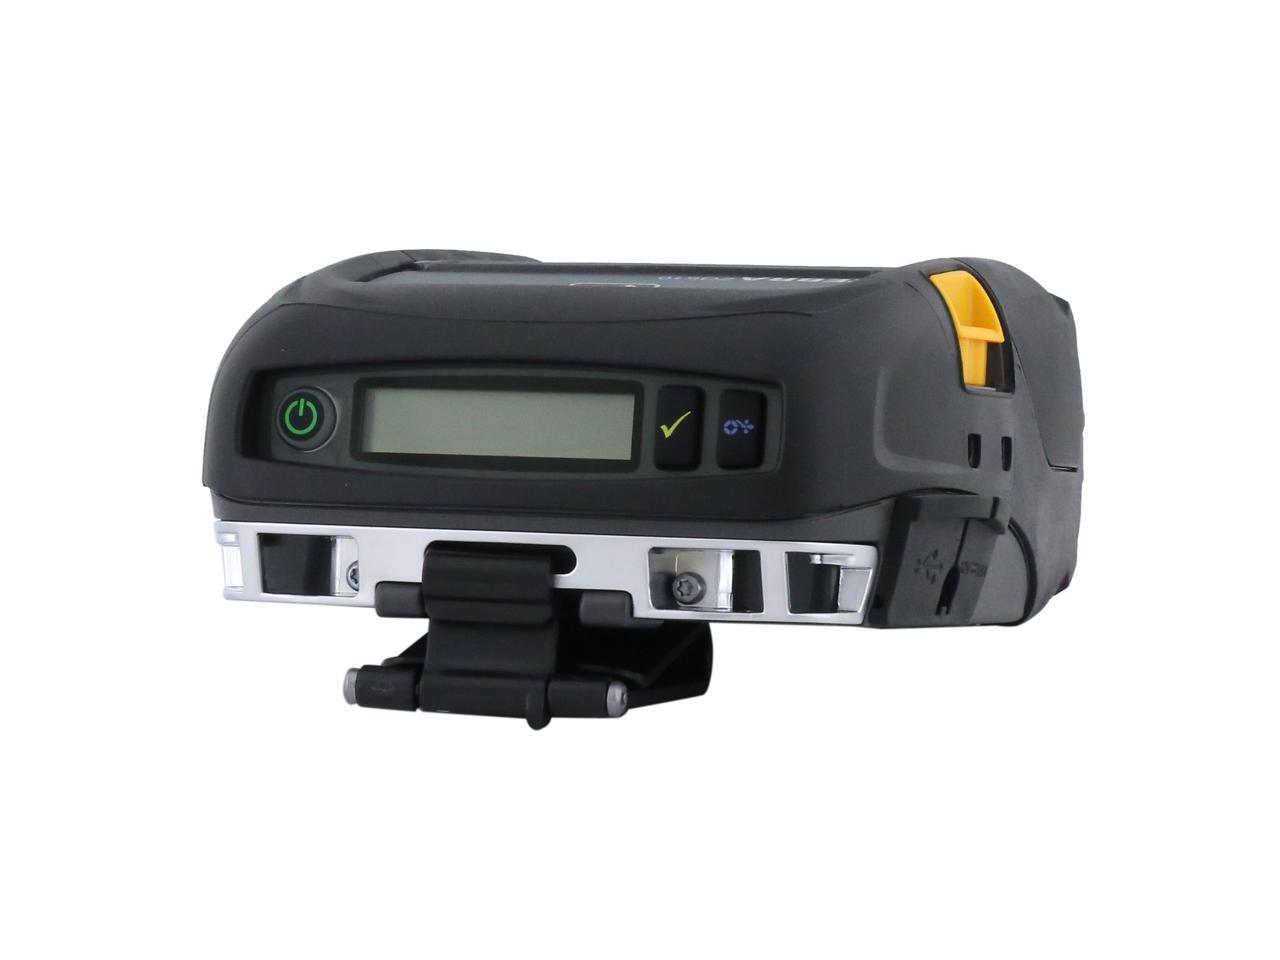 Zebra Zq510 3 Mobile Direct Thermal Receipt And Label Printer 203 Dpi Bluetooth 40 Linered 0748